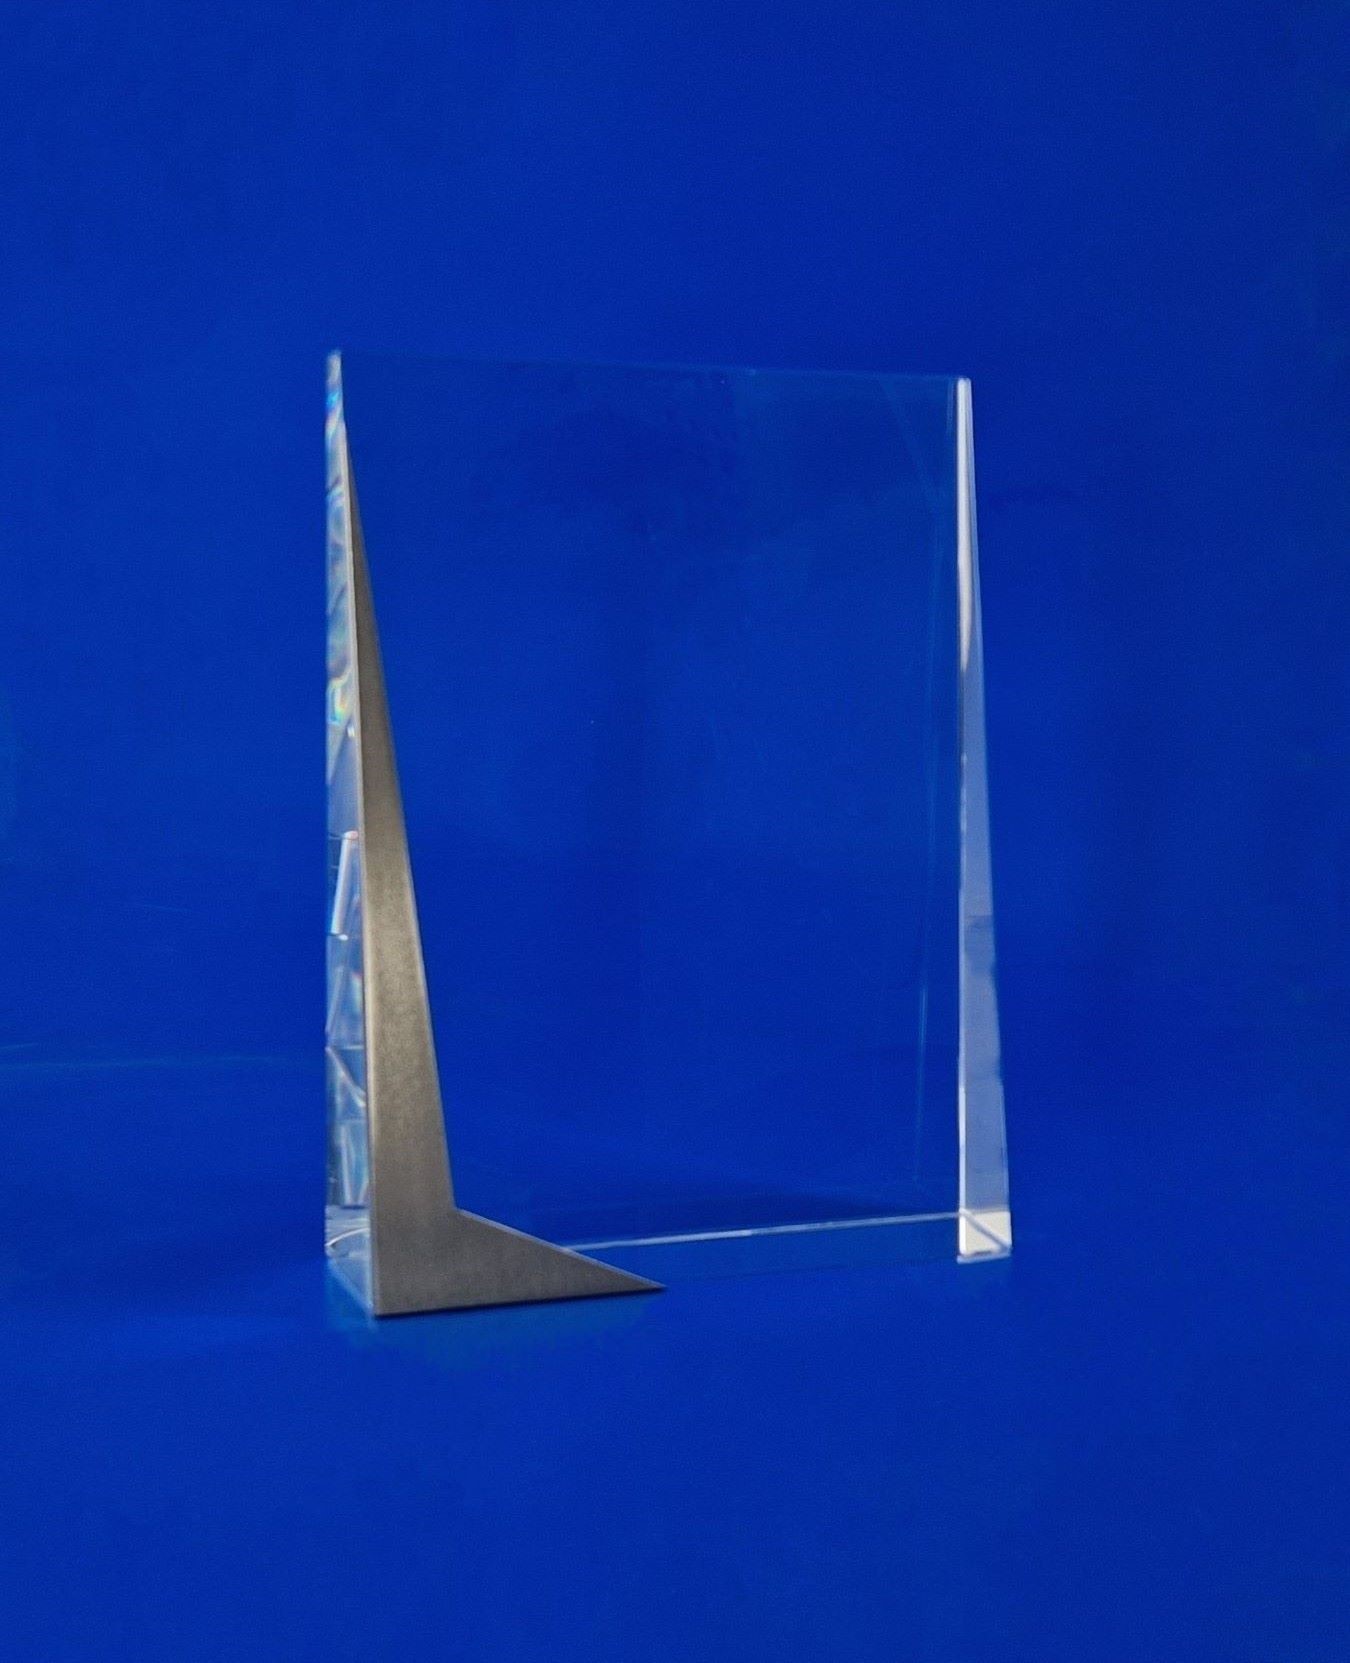 Glass award with a metal plate, the unconventional shape of the steel on the side draws the eye to the already elegant crystal statuette. CGW crystal awards slightly narrow towards the top, perfect for large text and logos.